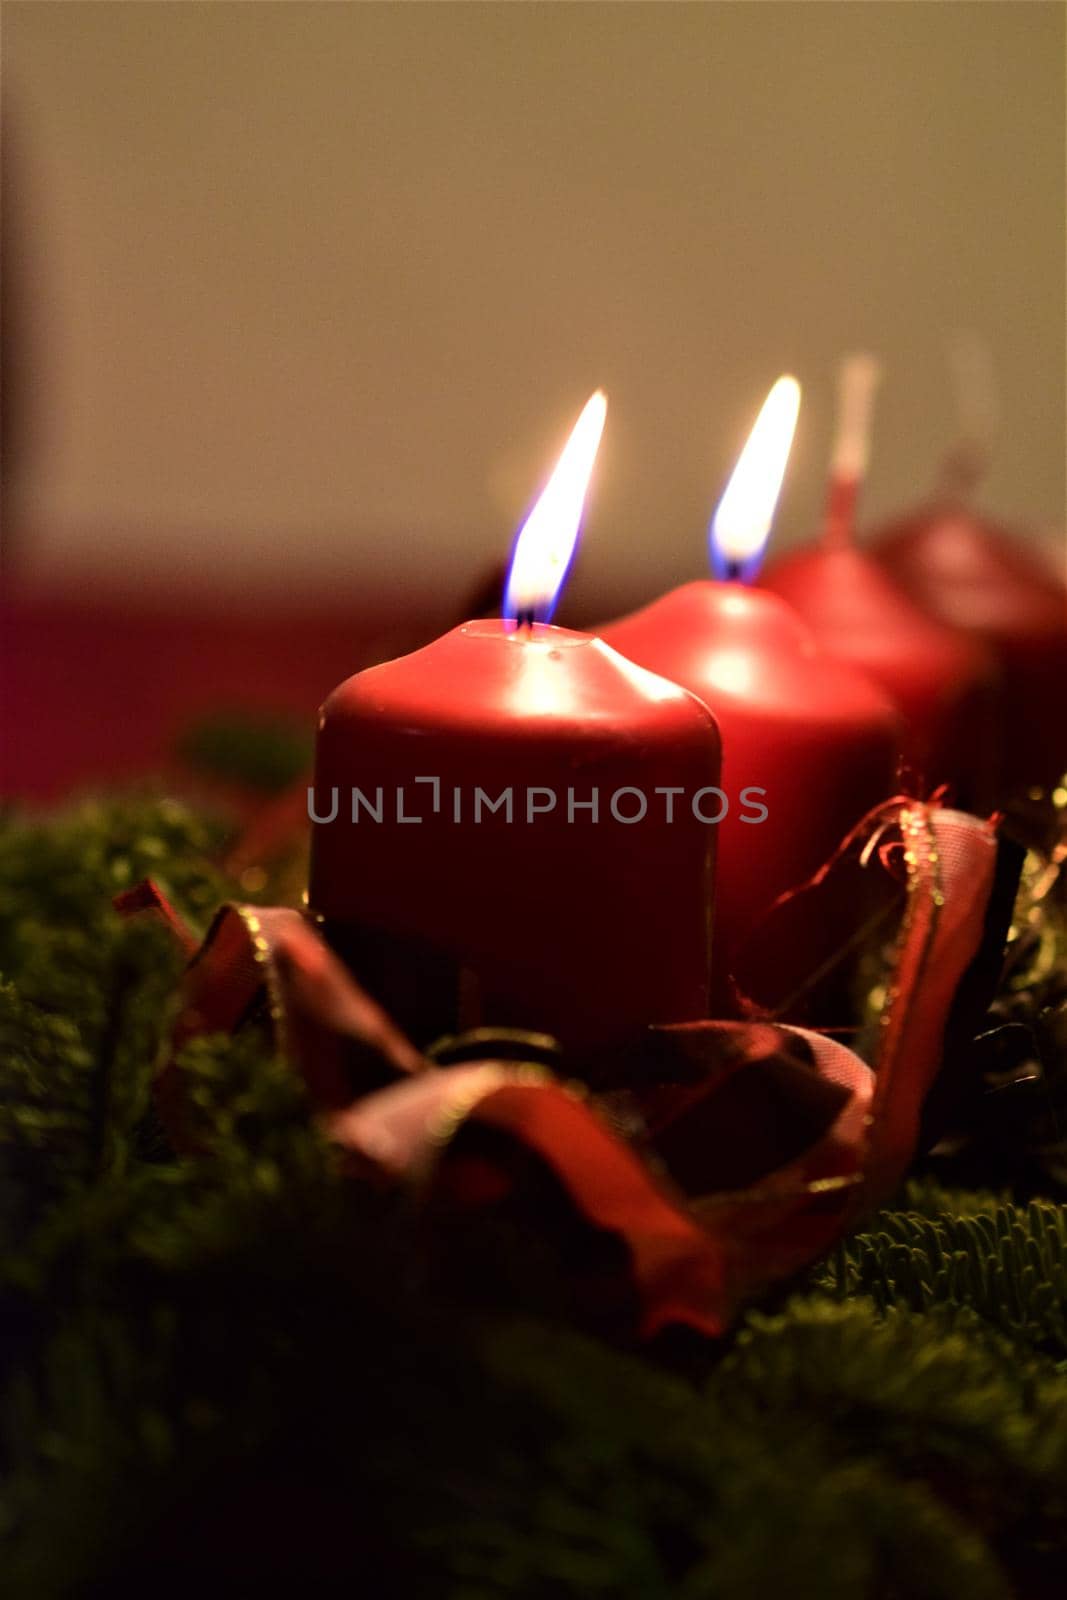 close-up of an Advent arrangement with 2 burning candles